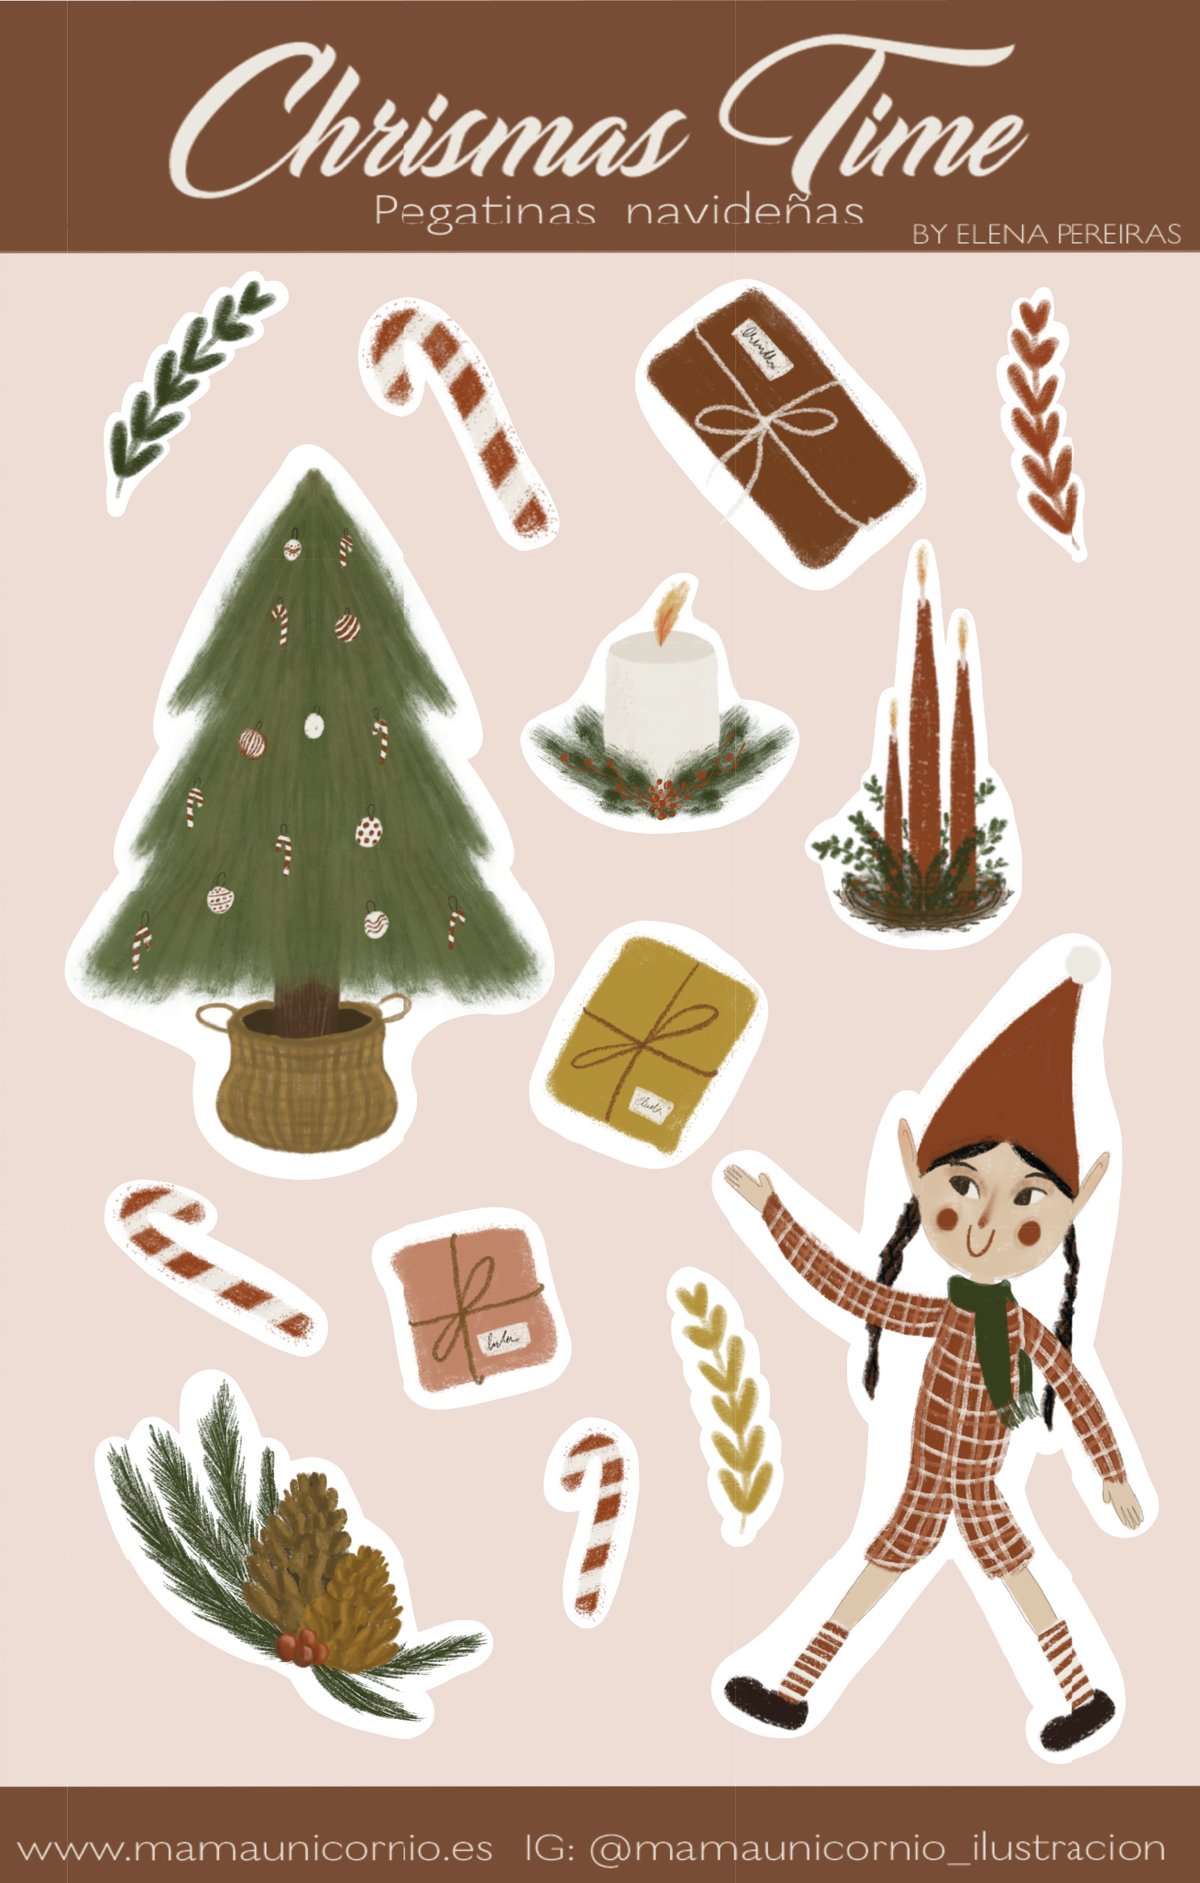 STICKERS "CHRISTMAS TIME"